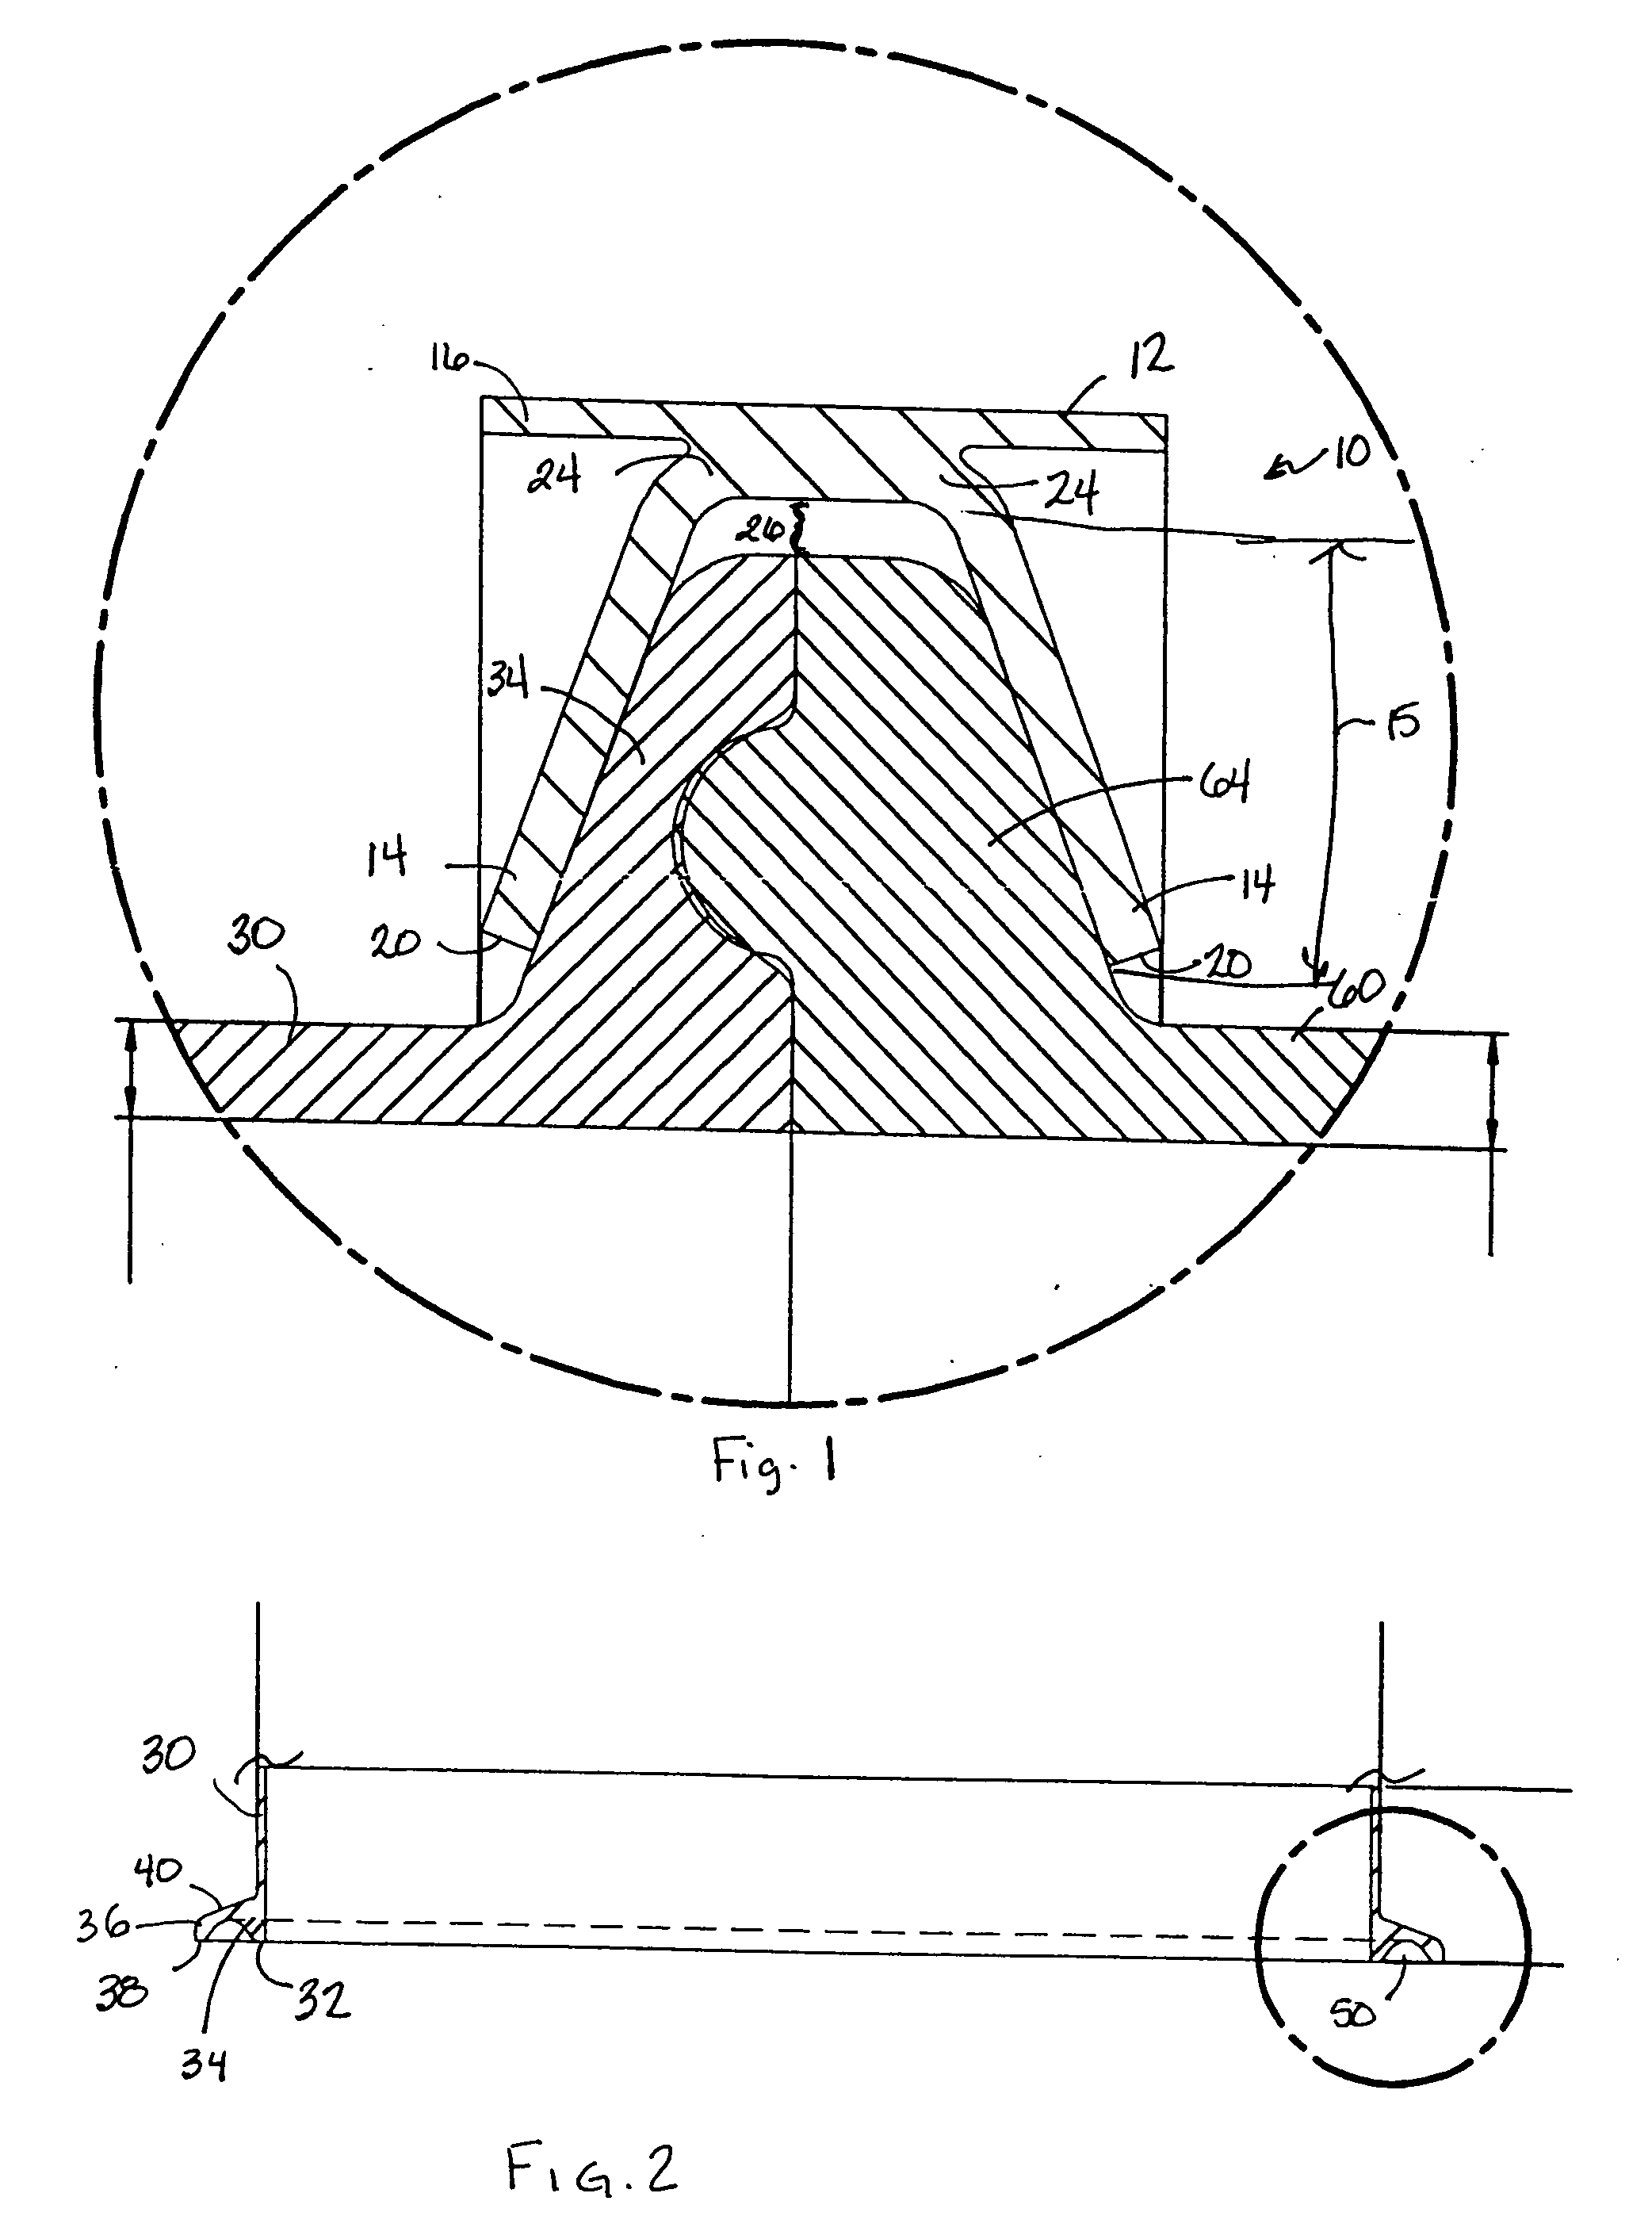 Sanitary sealed connector for fluid handling systems and storage devices